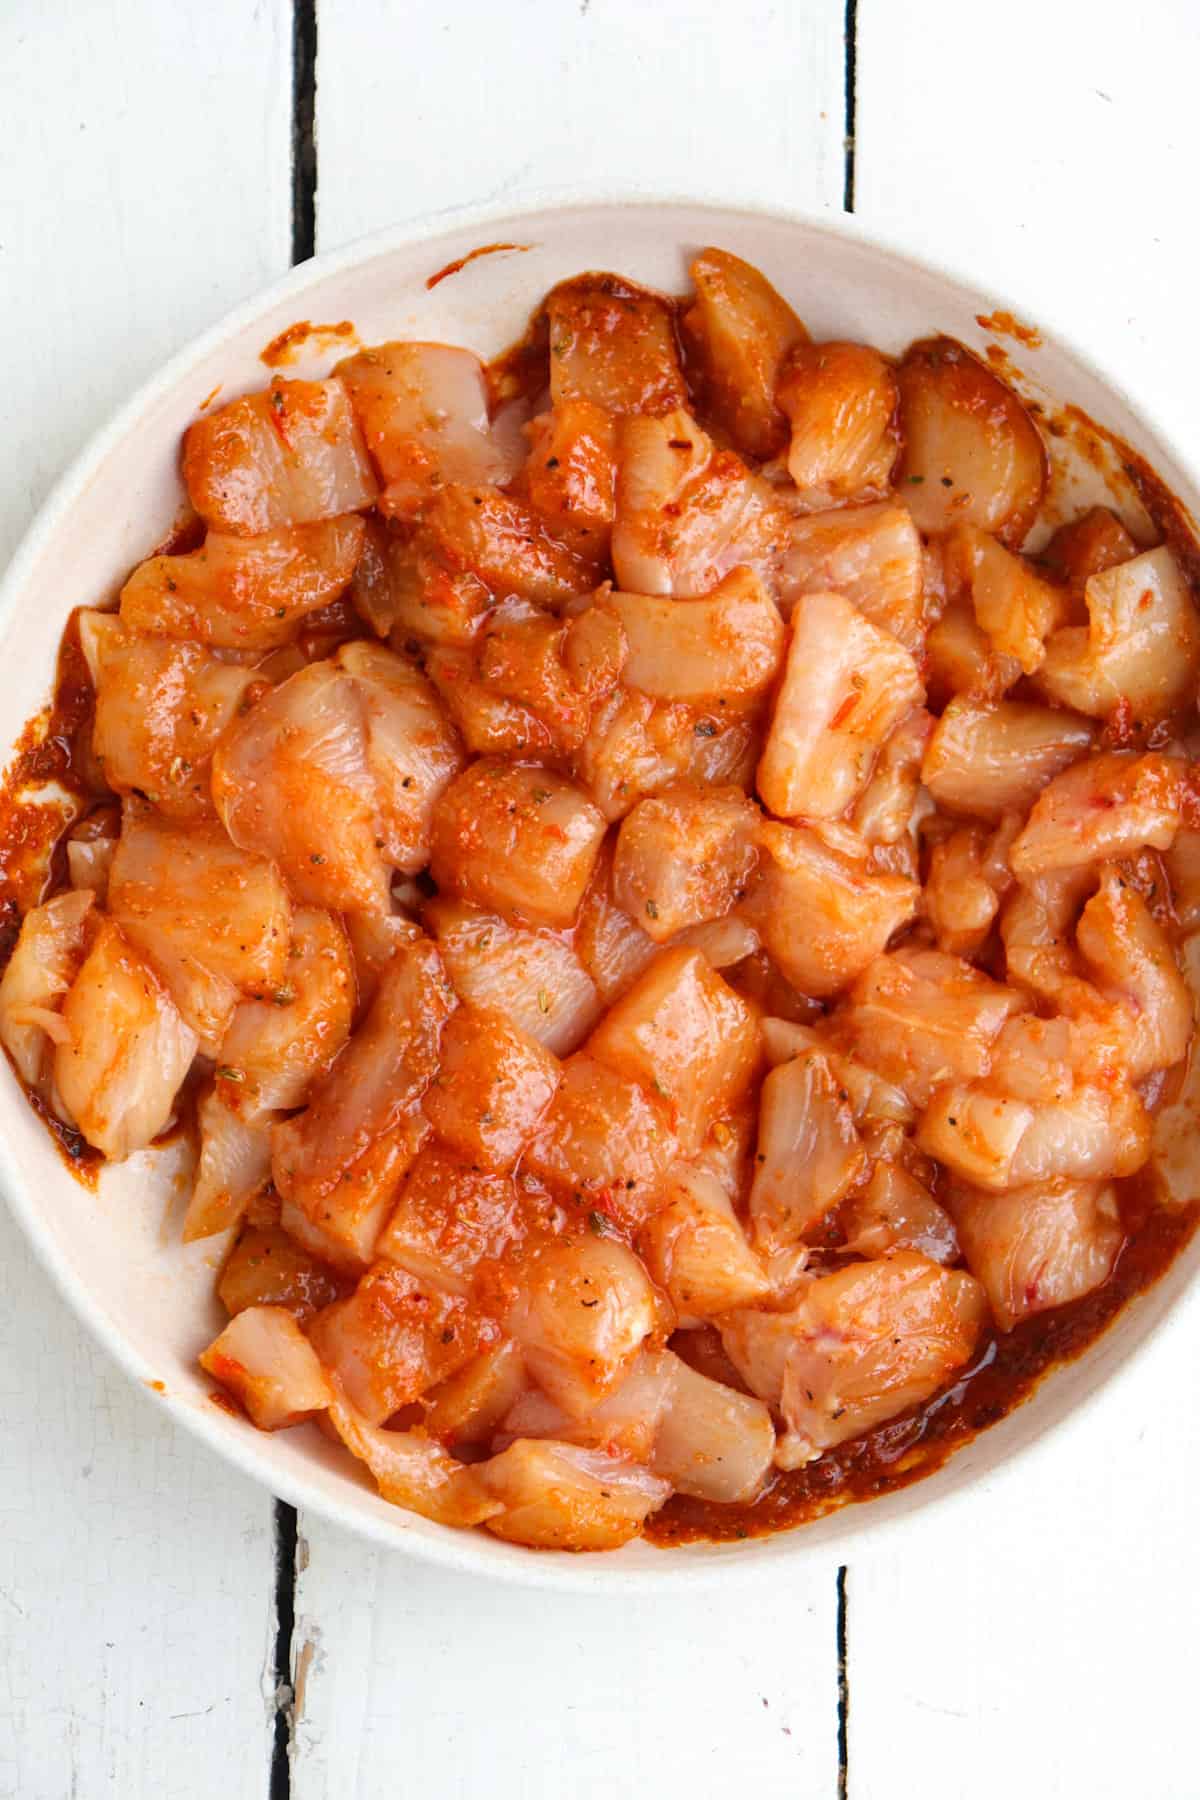 raw chicken pieces marinating in a shallow bowl.